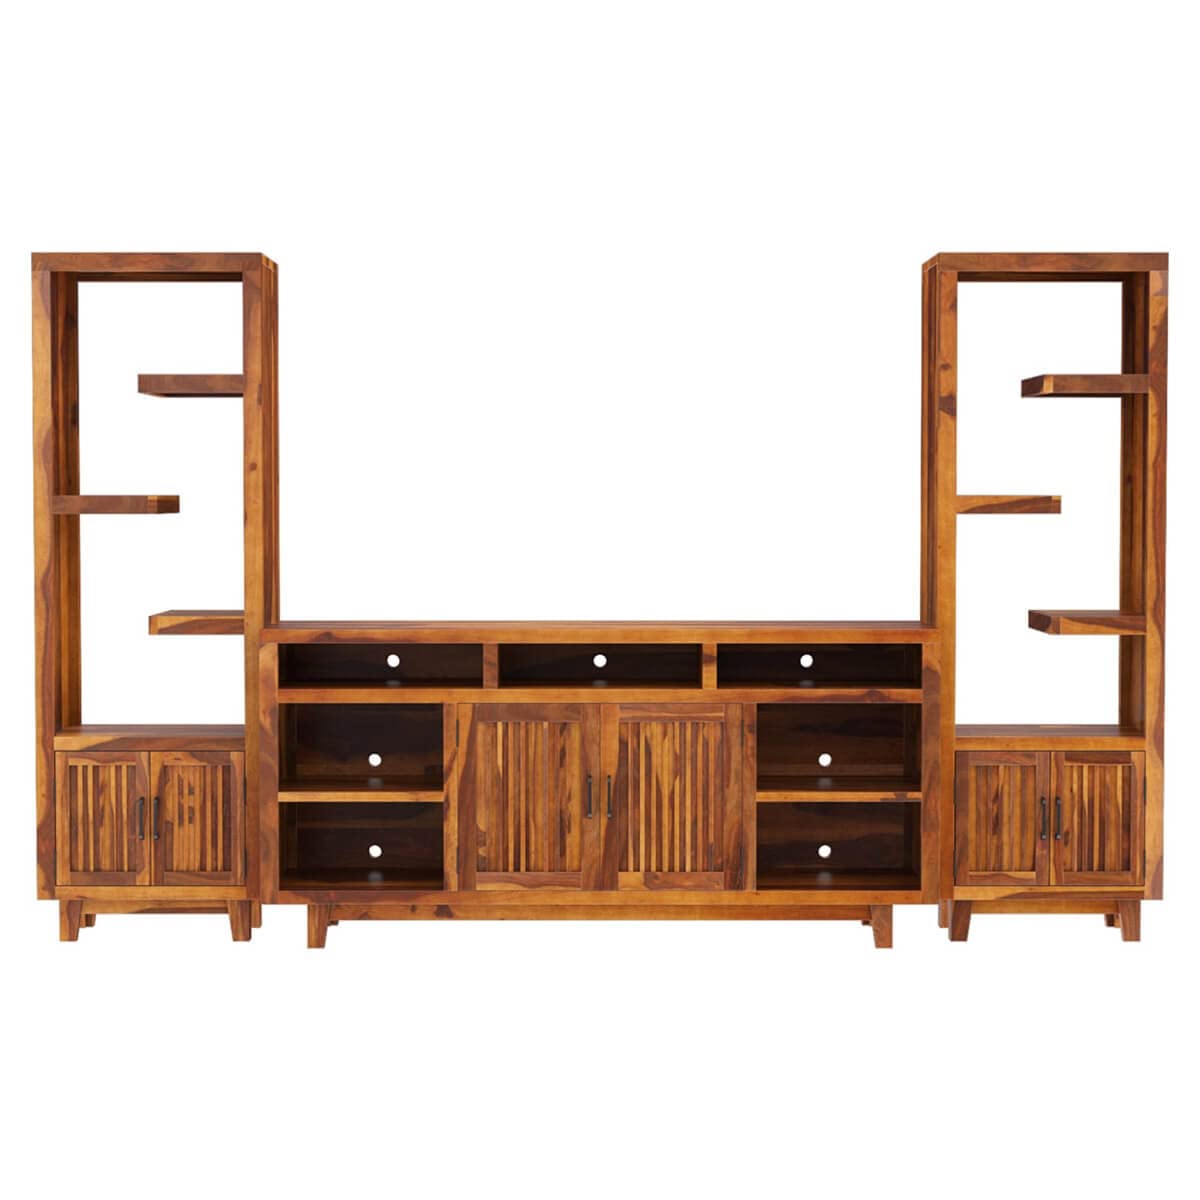 Woodmarwar Solid Sheesham Wood Entertainment Tv Unit With Storage Honey Finish For Home & Office Furniture